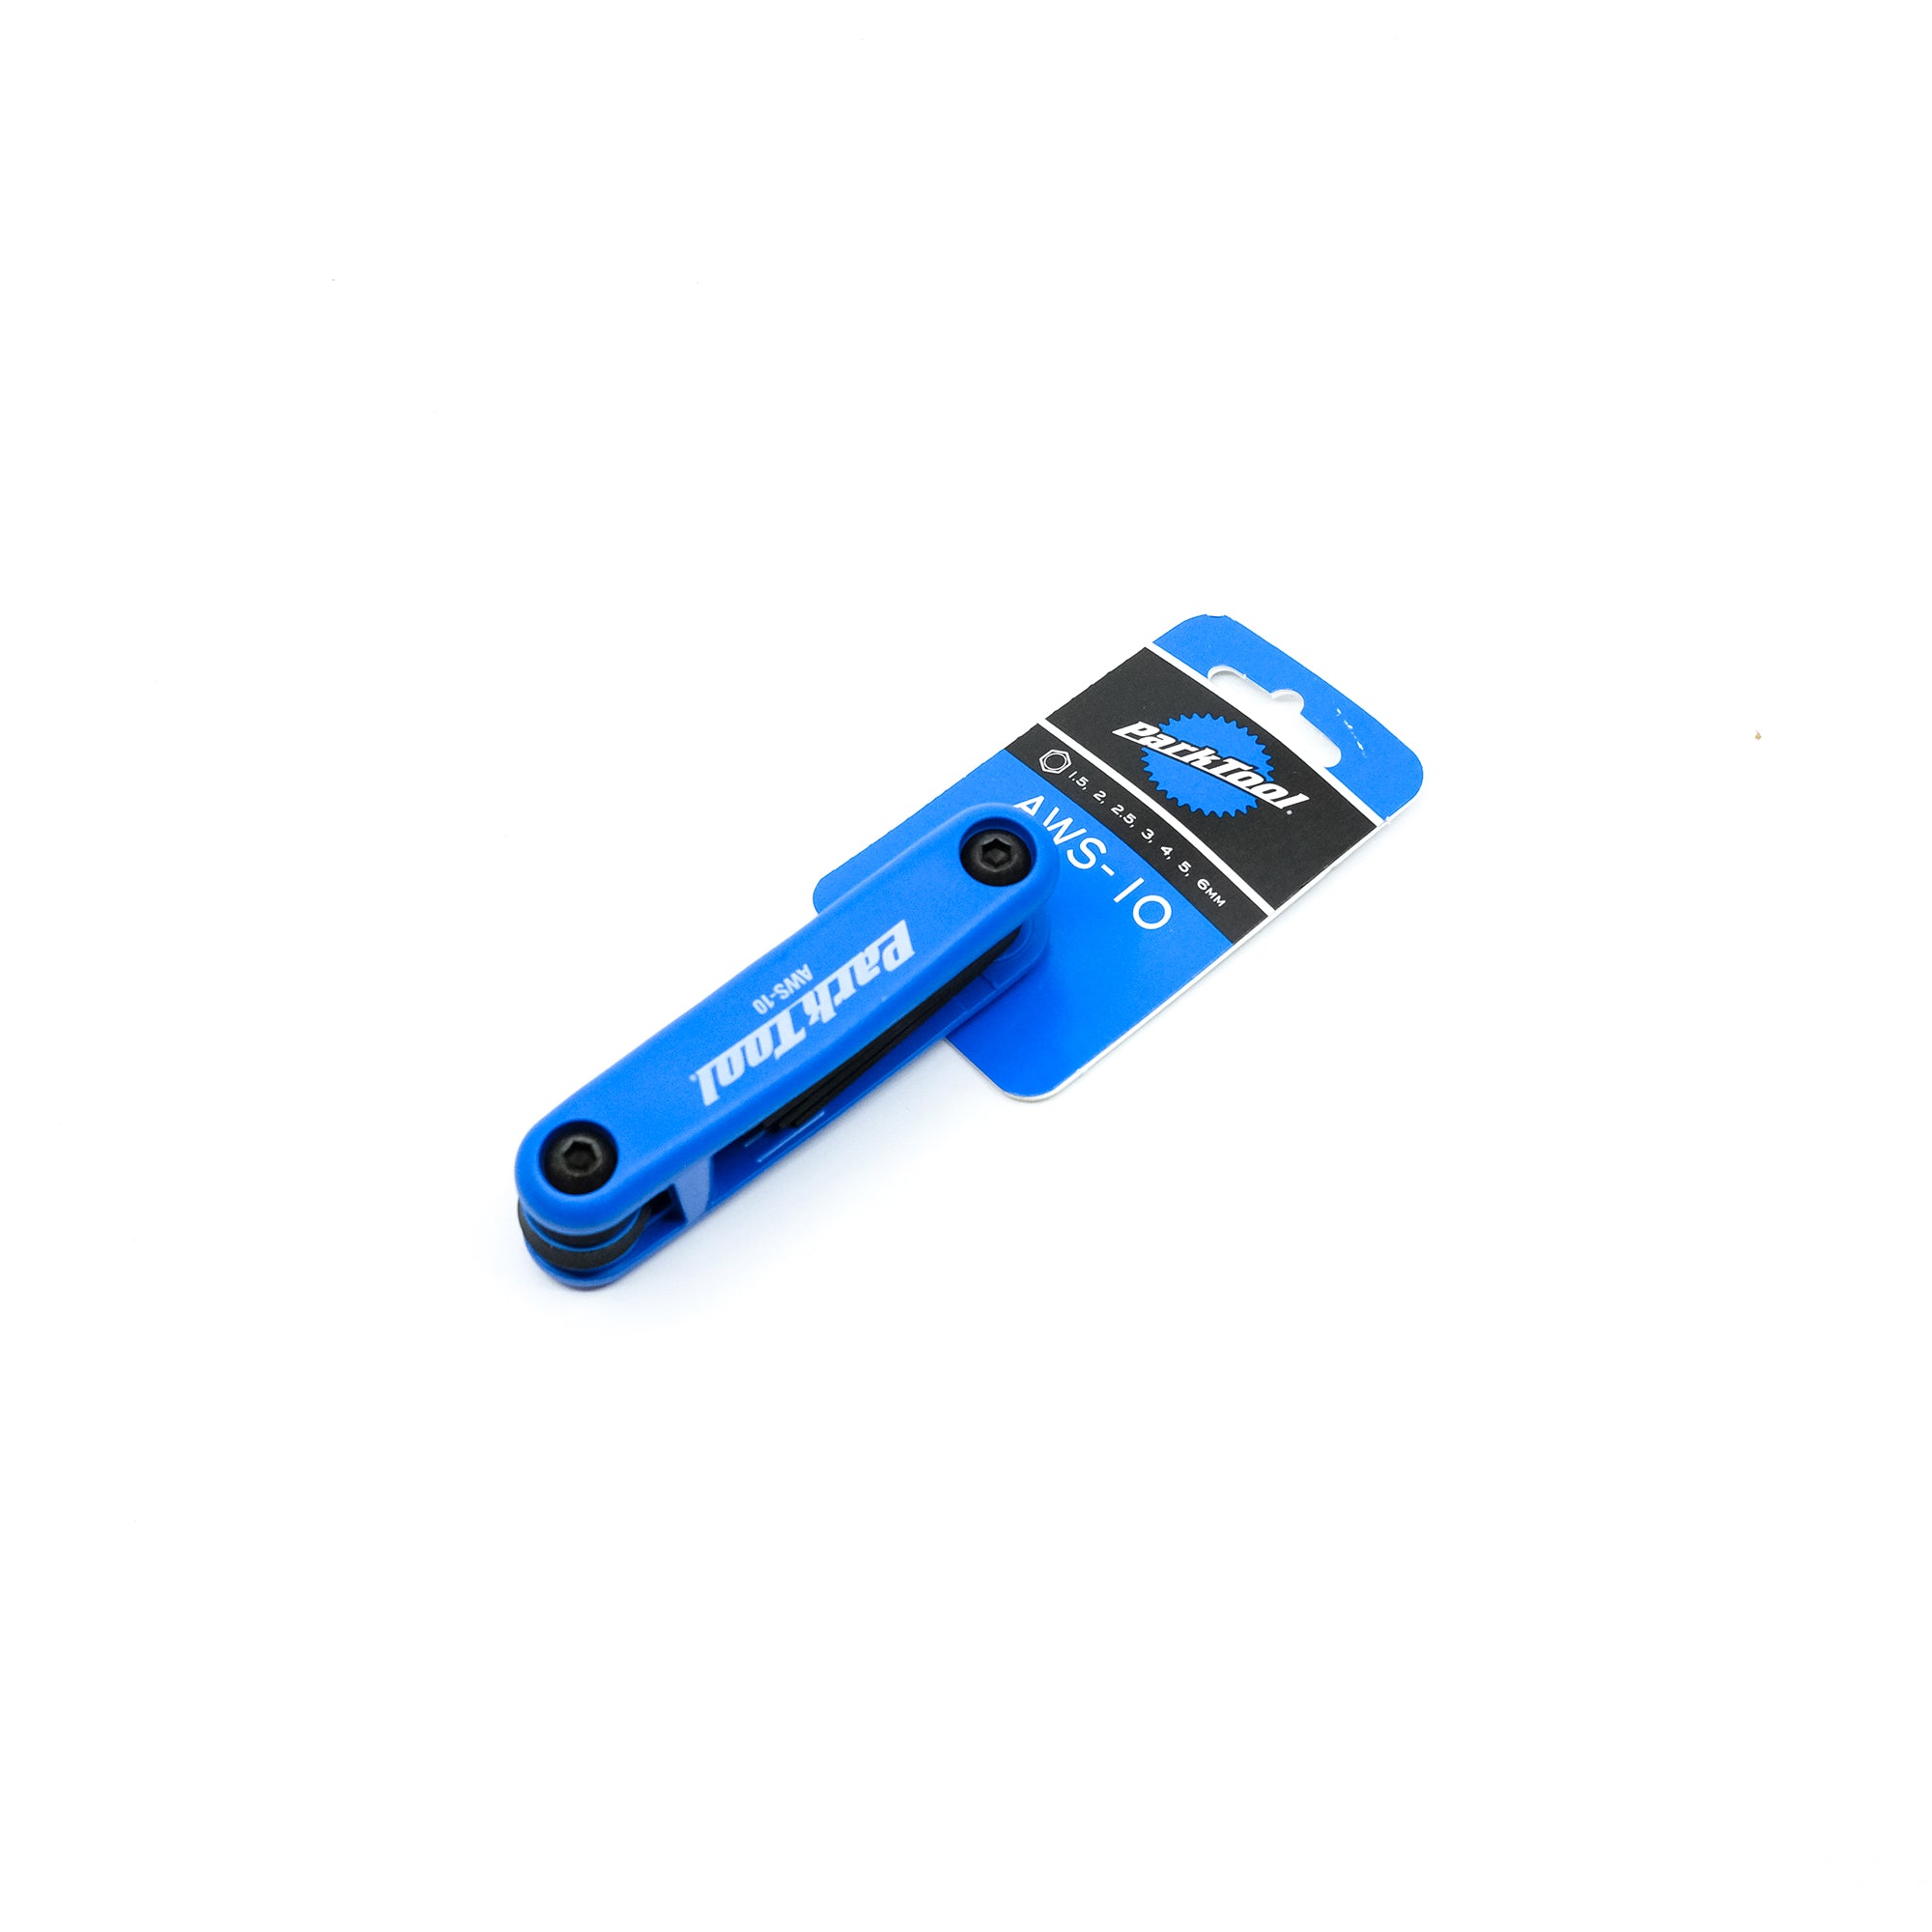 AWS-10 HEX Wrench Set by Park Tool